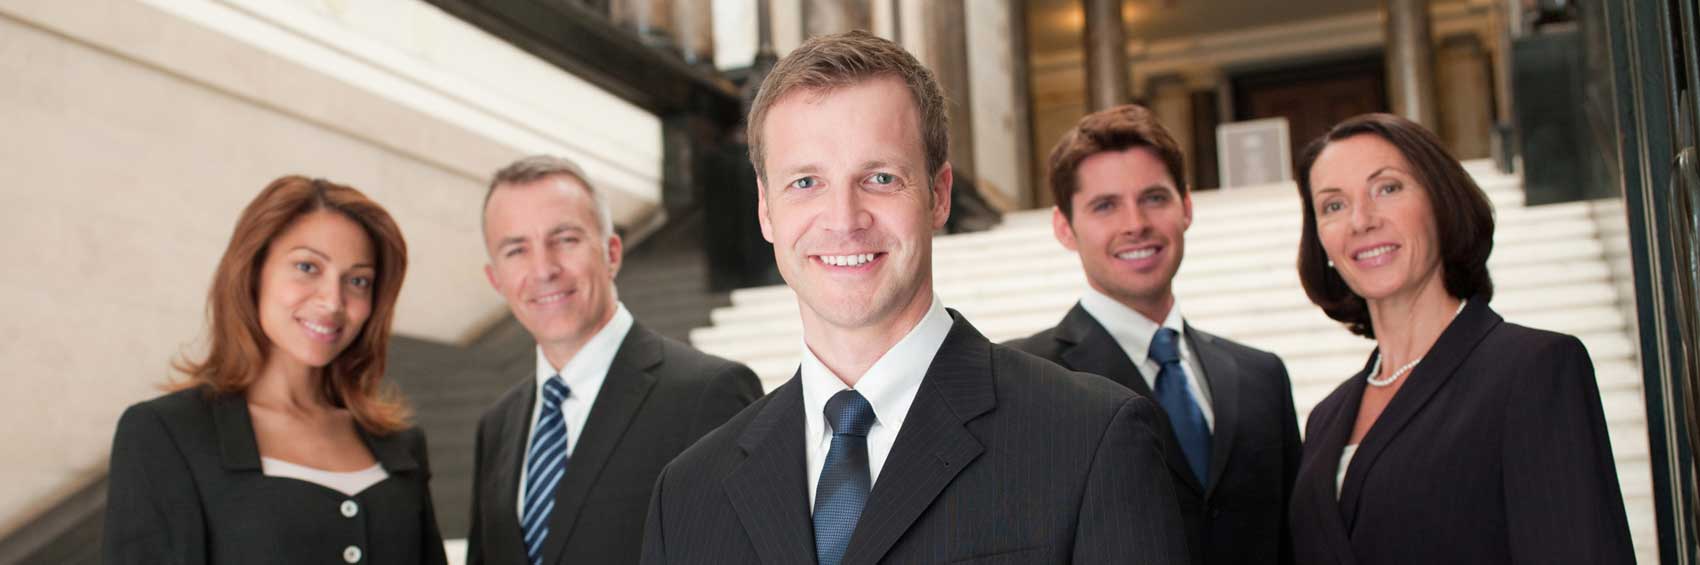 group of business people standing in front of stairs. commercial business insurance